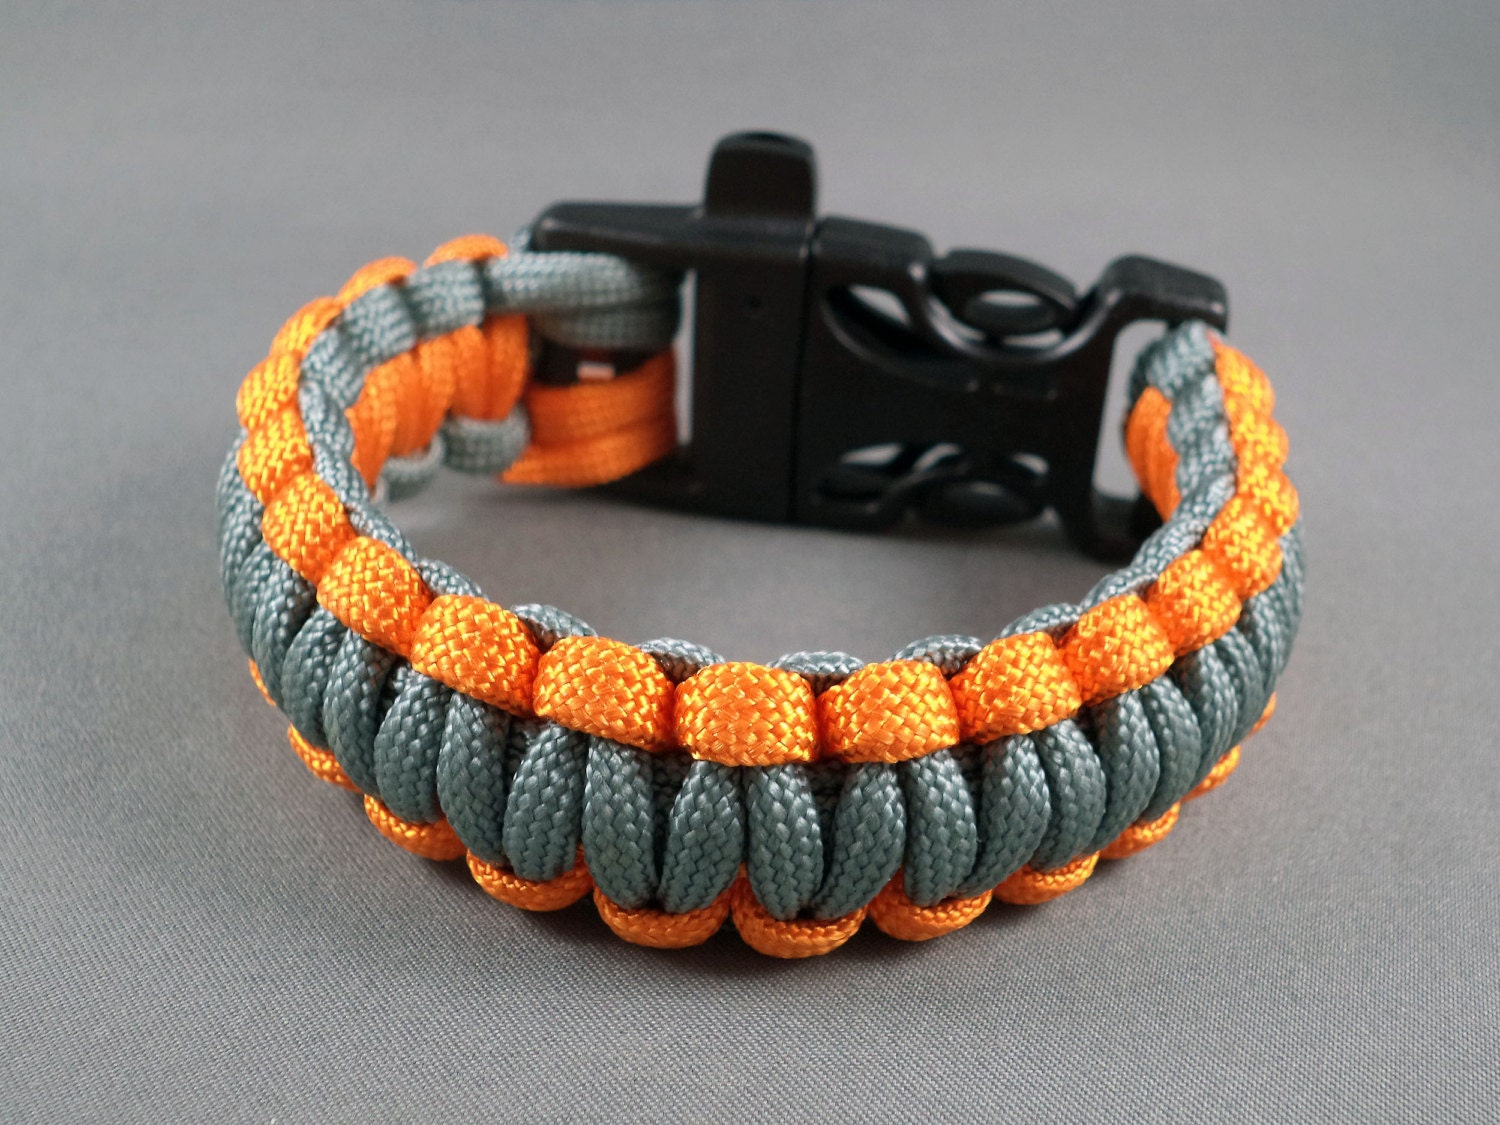 8 inch orange and gray paracord survival bracelet with